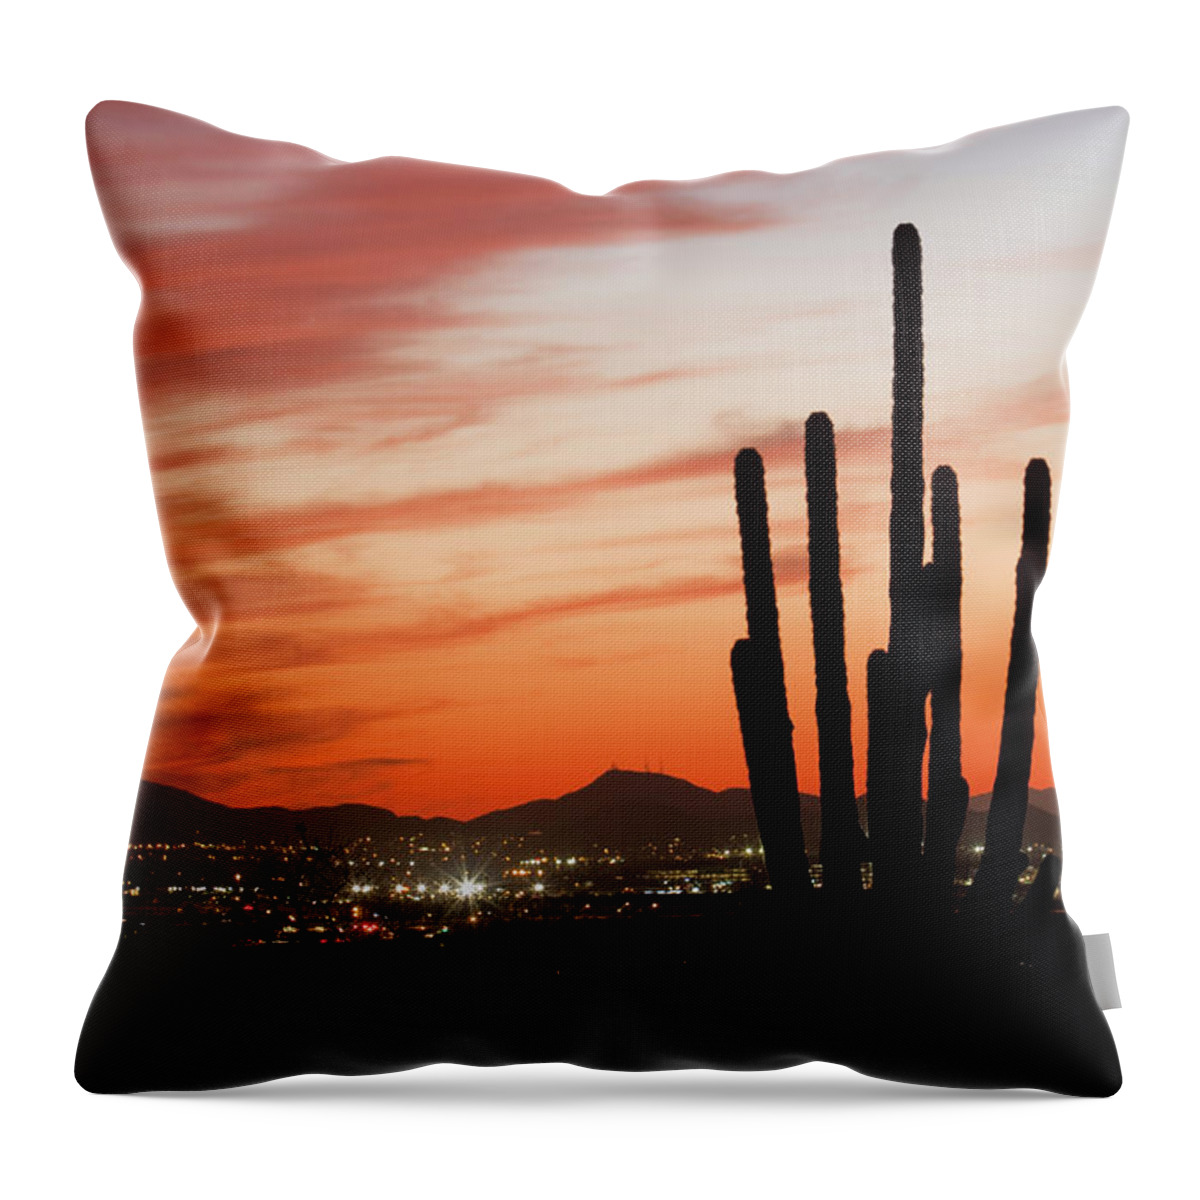 Saguaro Cactus Throw Pillow featuring the photograph Saguaro Cactus Silhouette At Dusk by Dougbennett